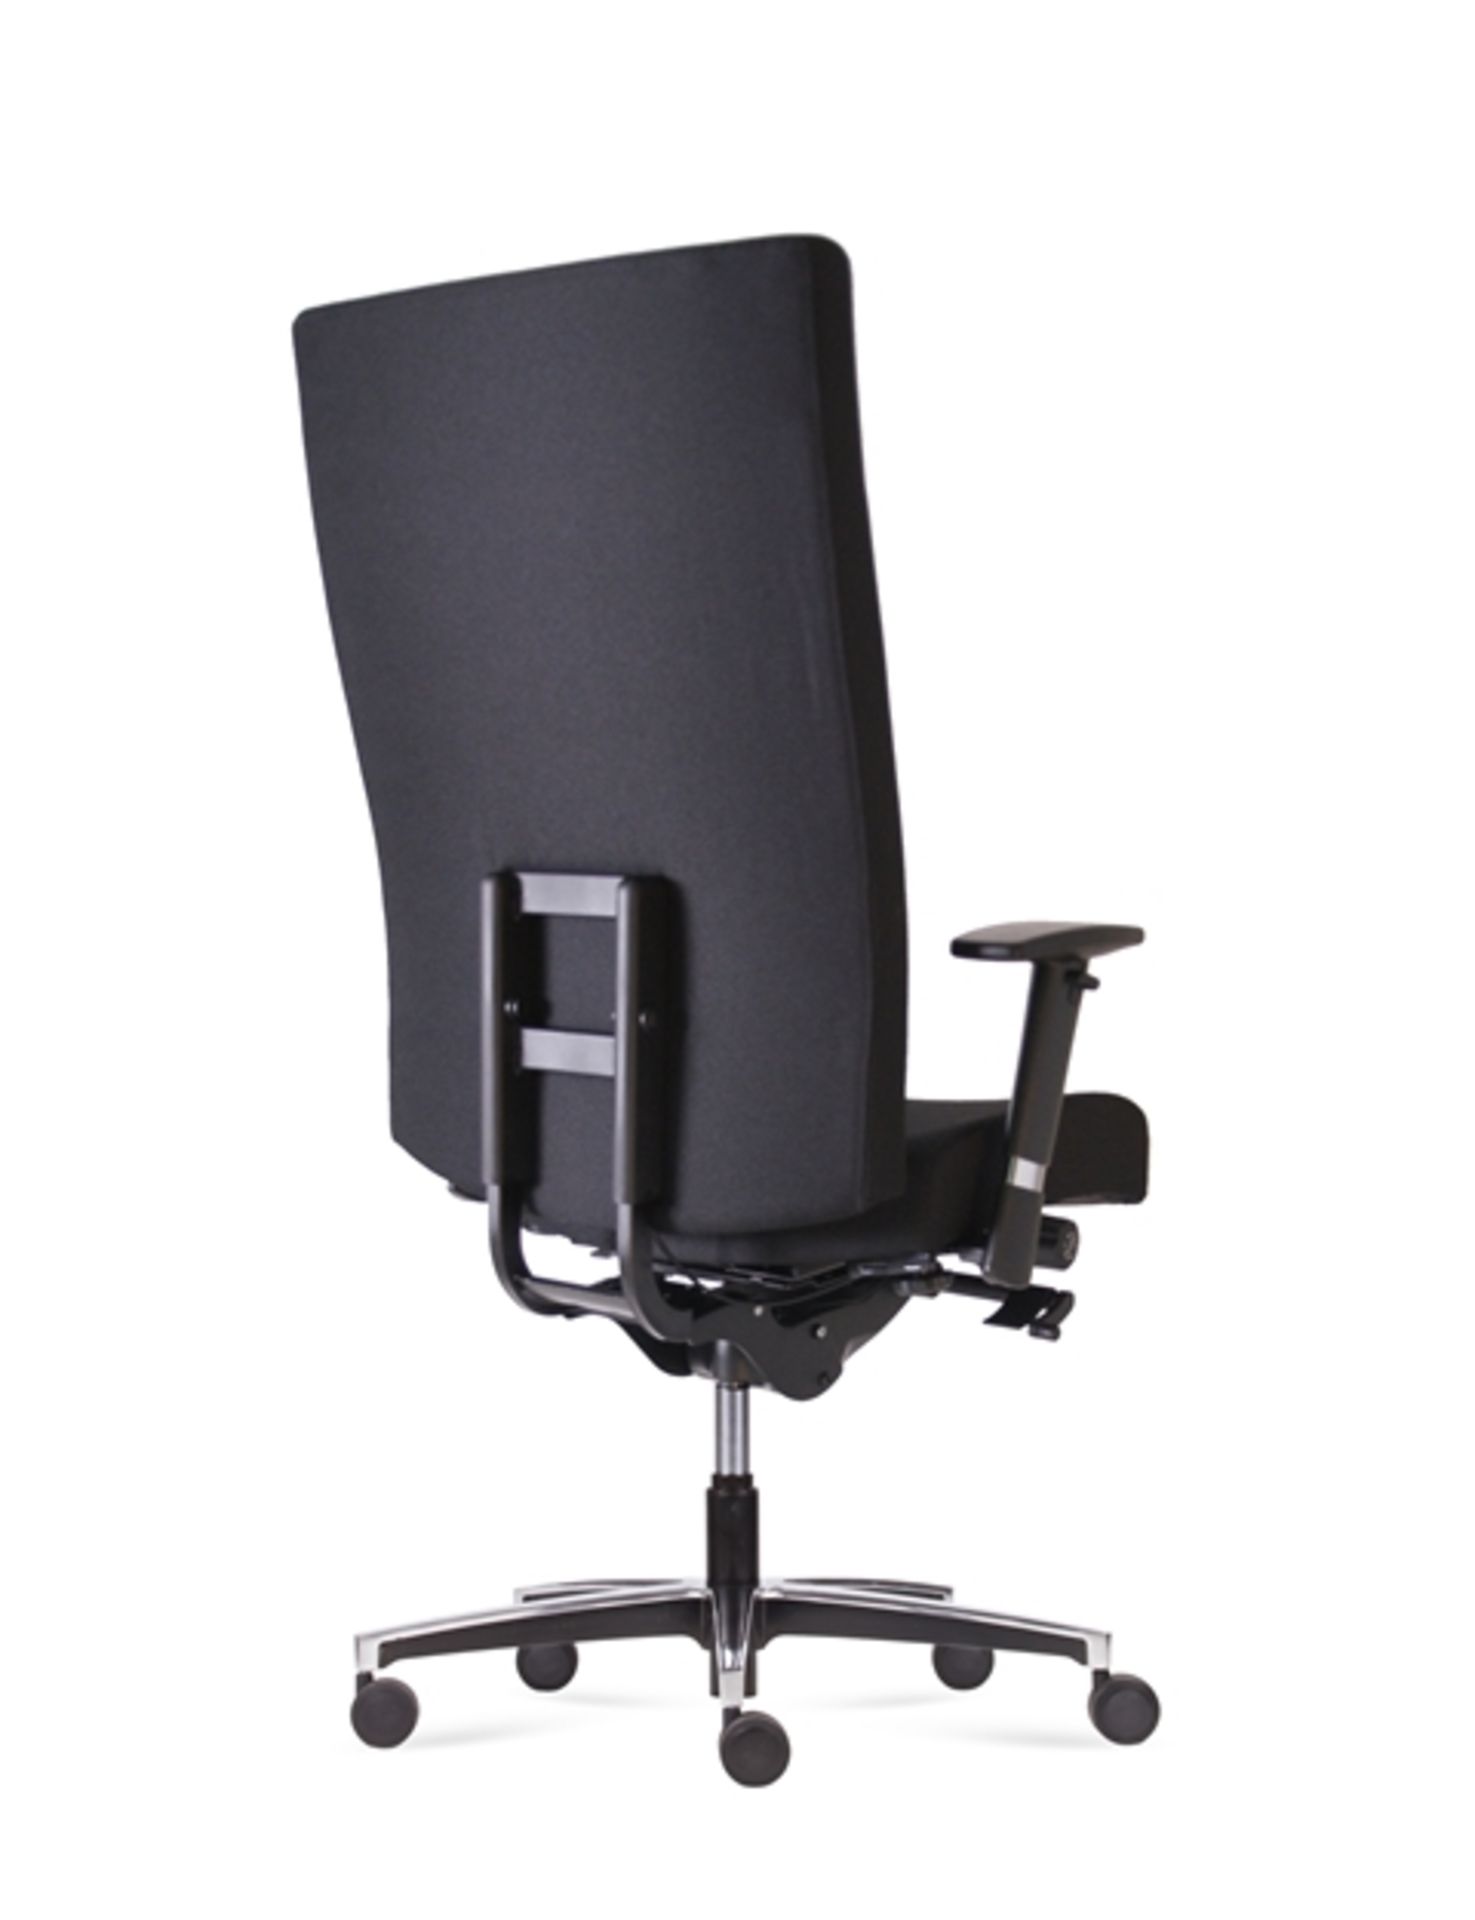 Unused ergonomic office chair in black (RRP £299) located in Stafford, viewing by appointment only - Image 5 of 6